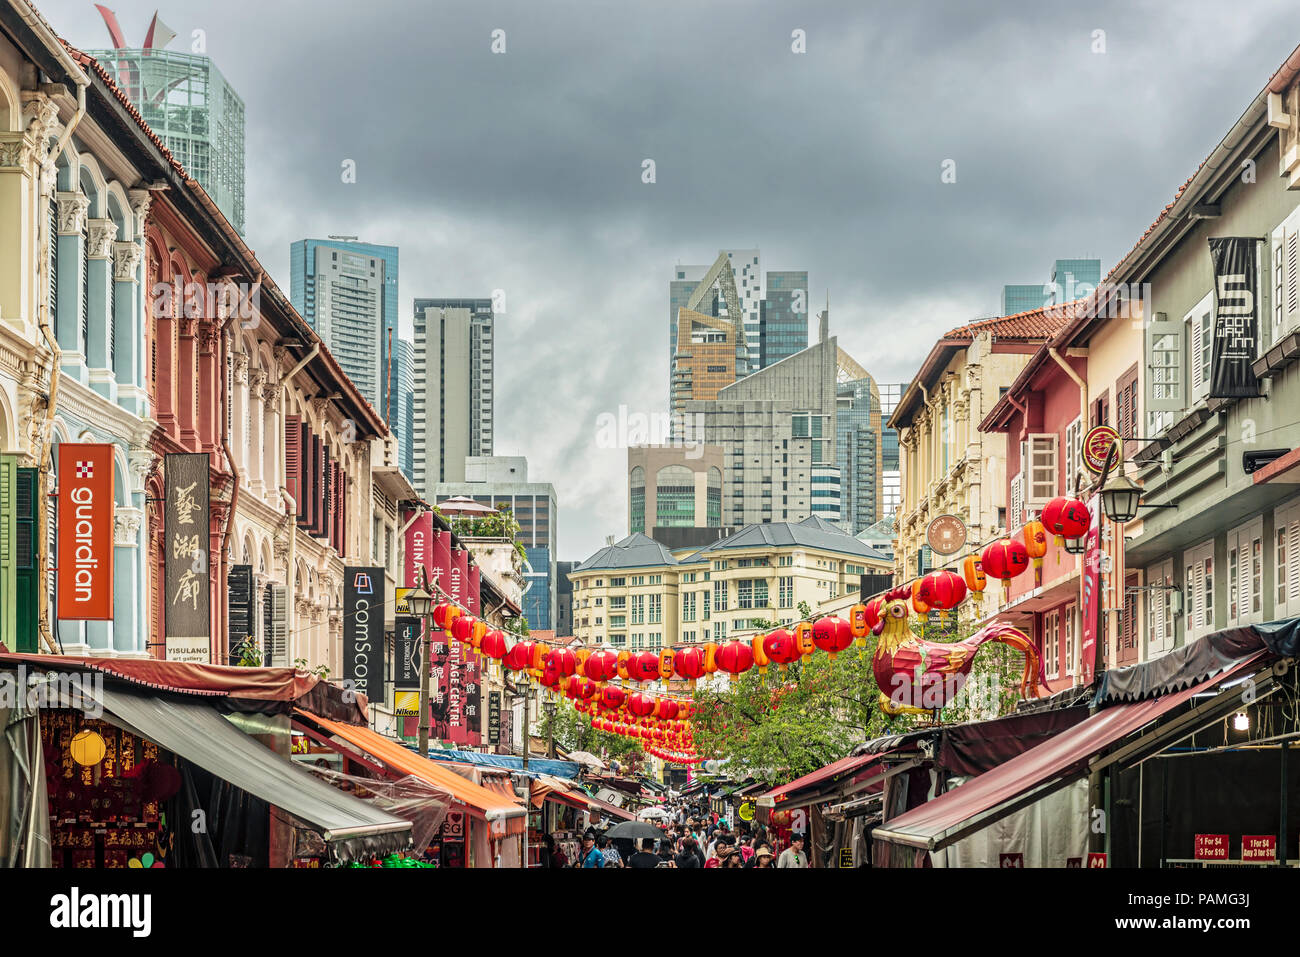 Singapore - January 12, 2018: View at the old colonial houses in the part of Singapore called Chinatown. Stock Photo